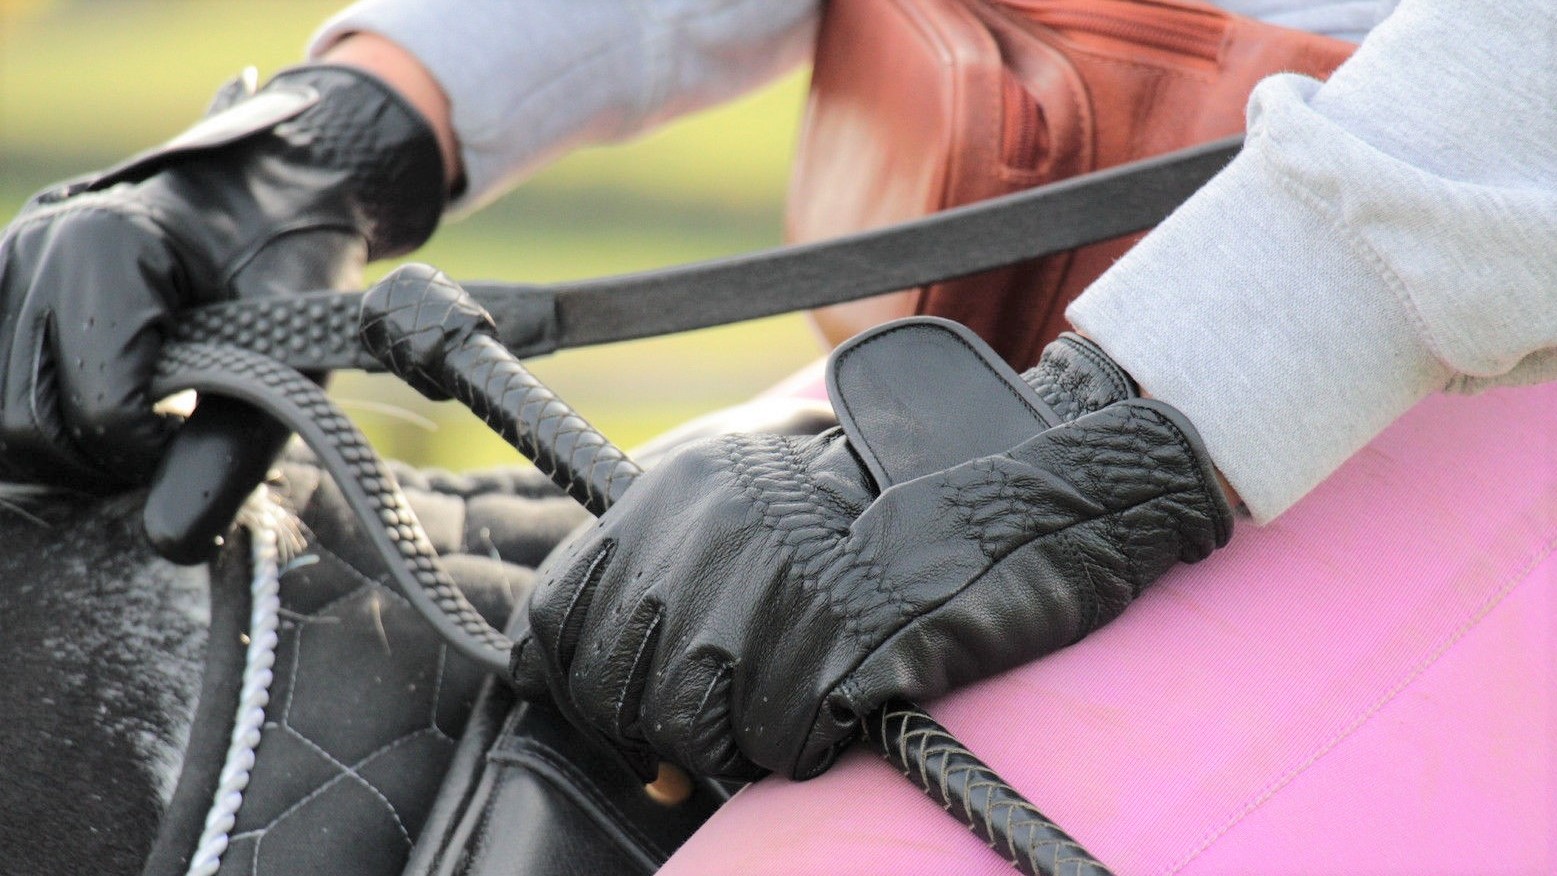 Winter Horse Riding Long Cuff Gloves with 70gms of Thinsulate & Grippy Palms 